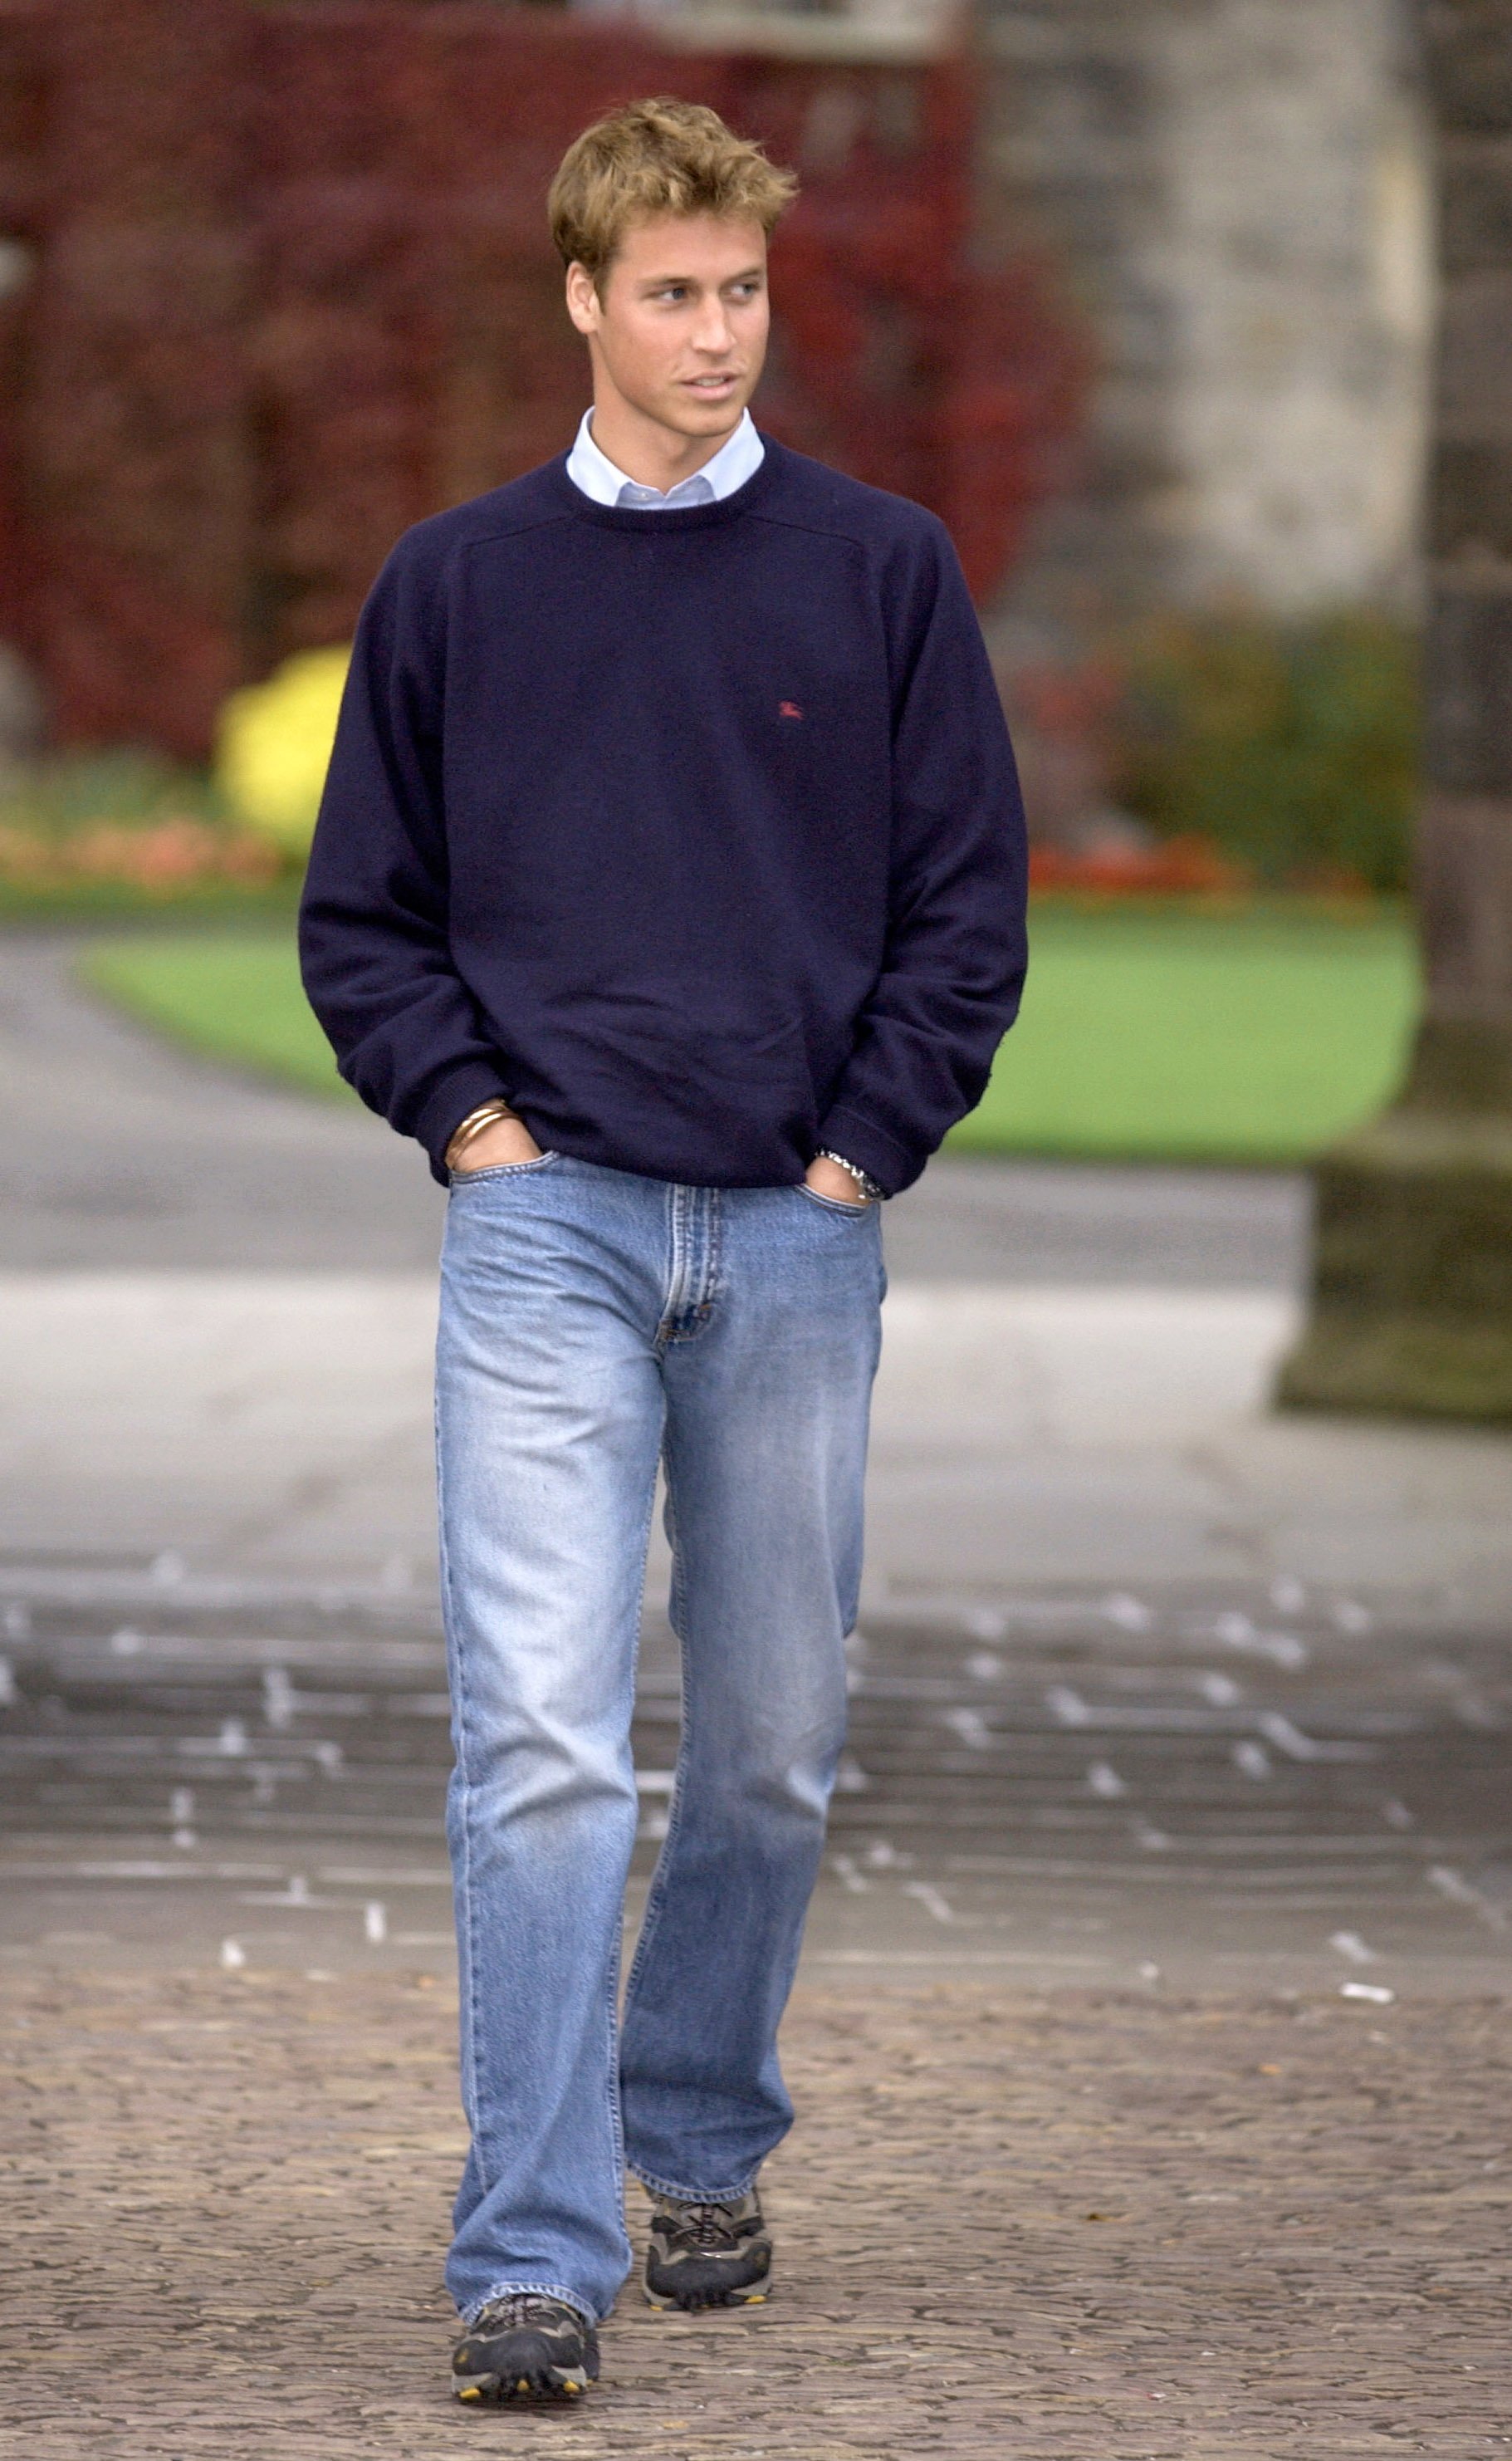 Prince William dressed Casually in jeans arriving at St. Andrews University In Scotland